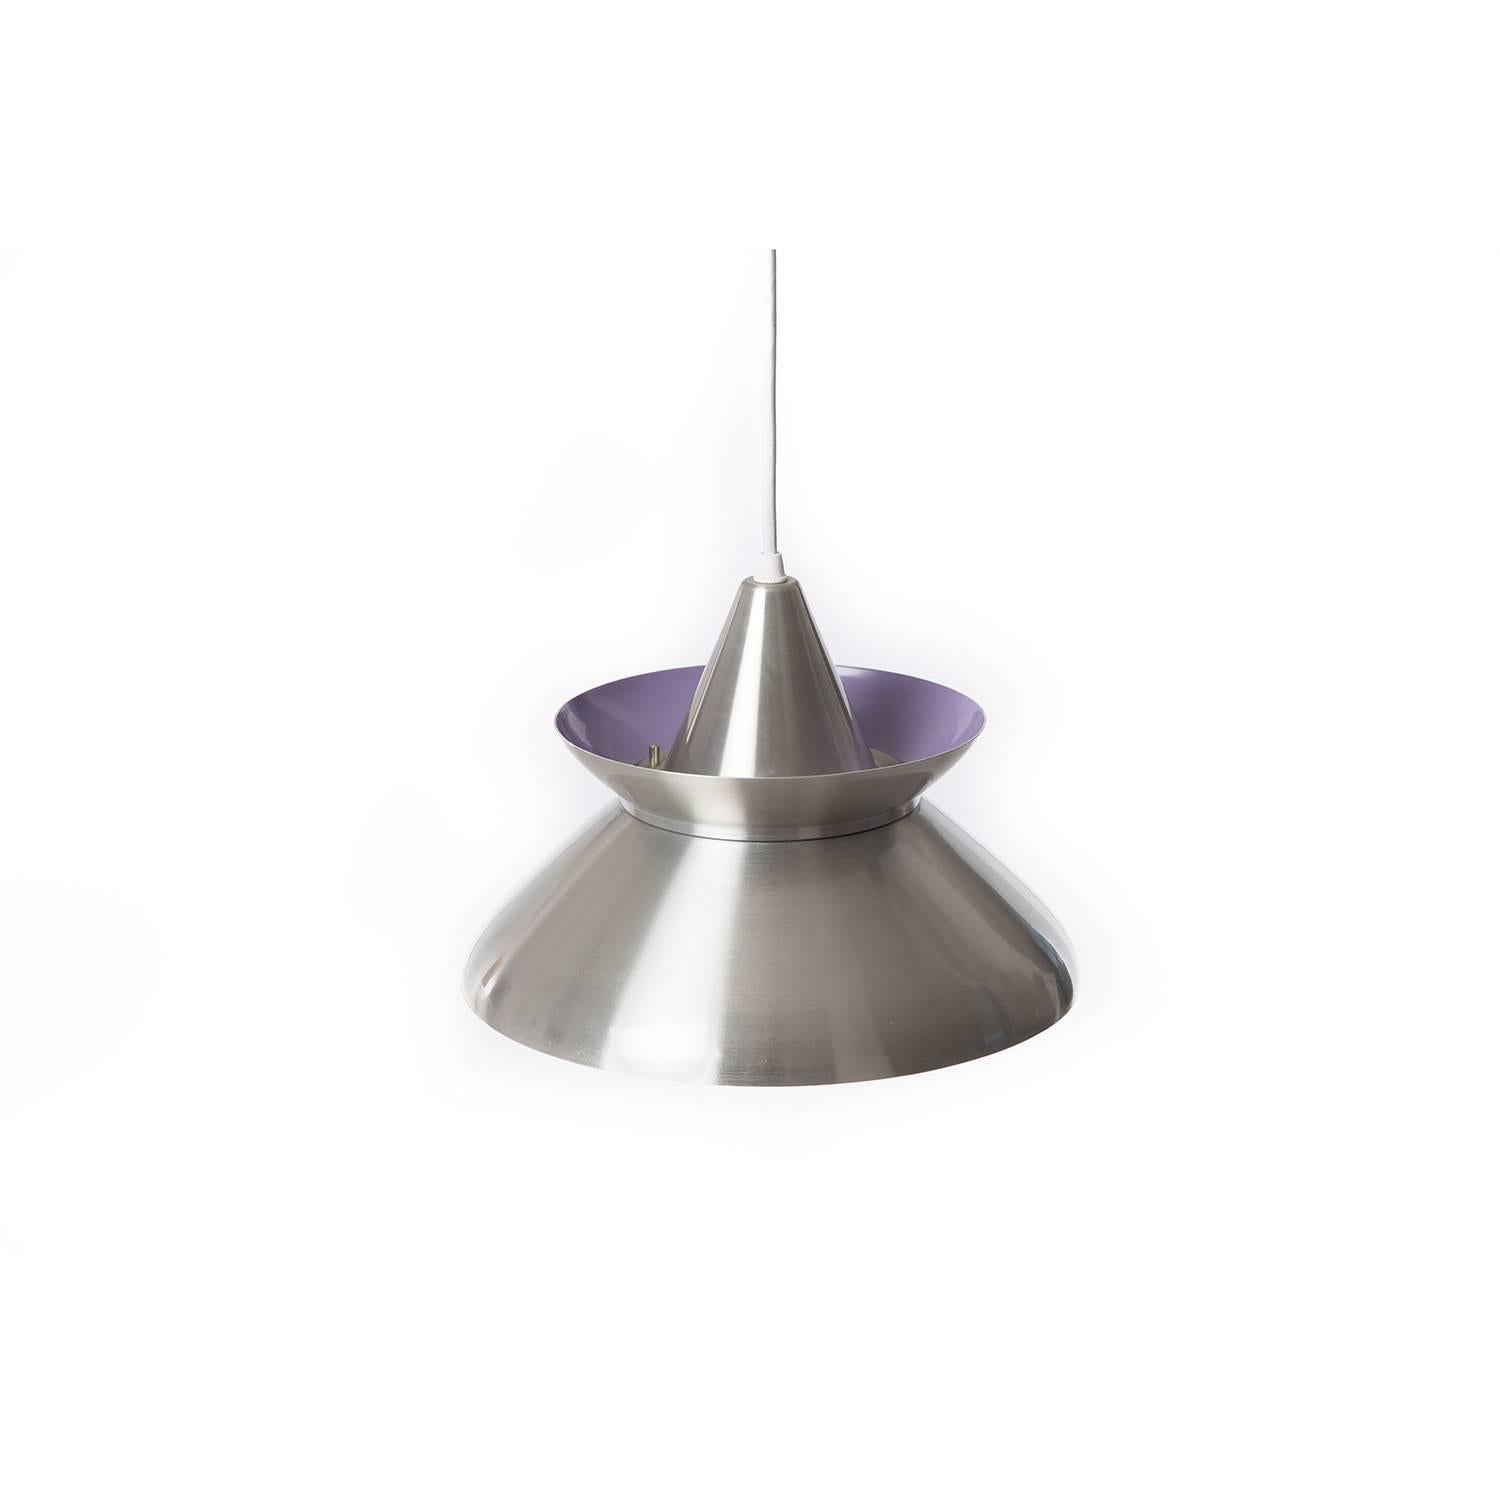 This adorable aluminium pendant includes lavender powder-coated detailing on bottom and upper tiers.